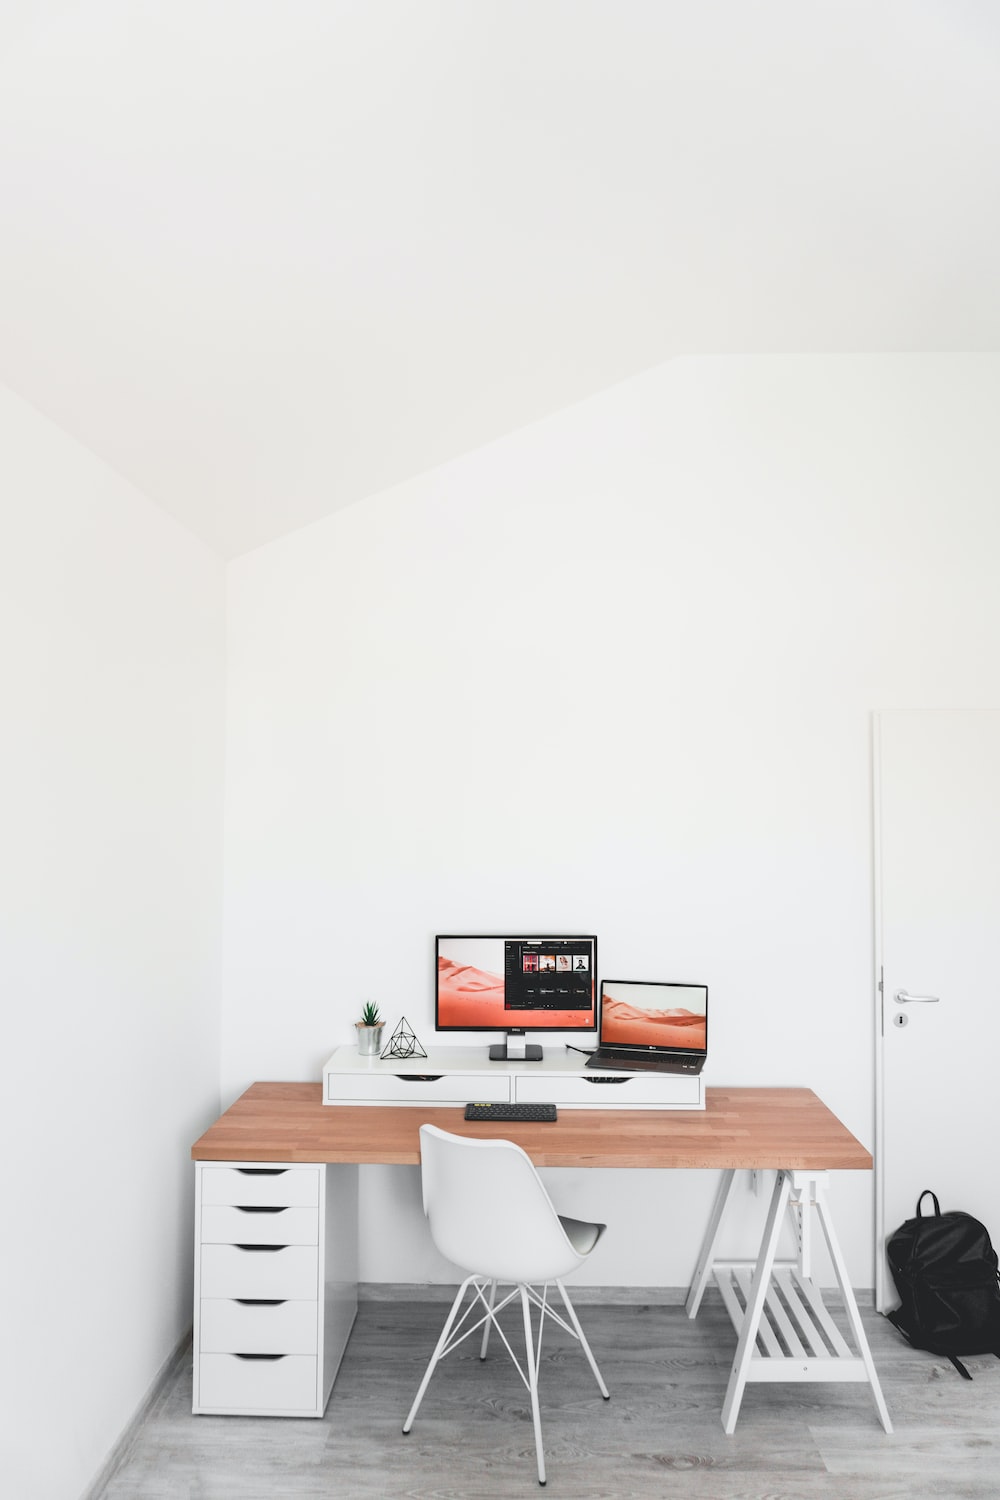 Is it better to have desk facing wall or window?